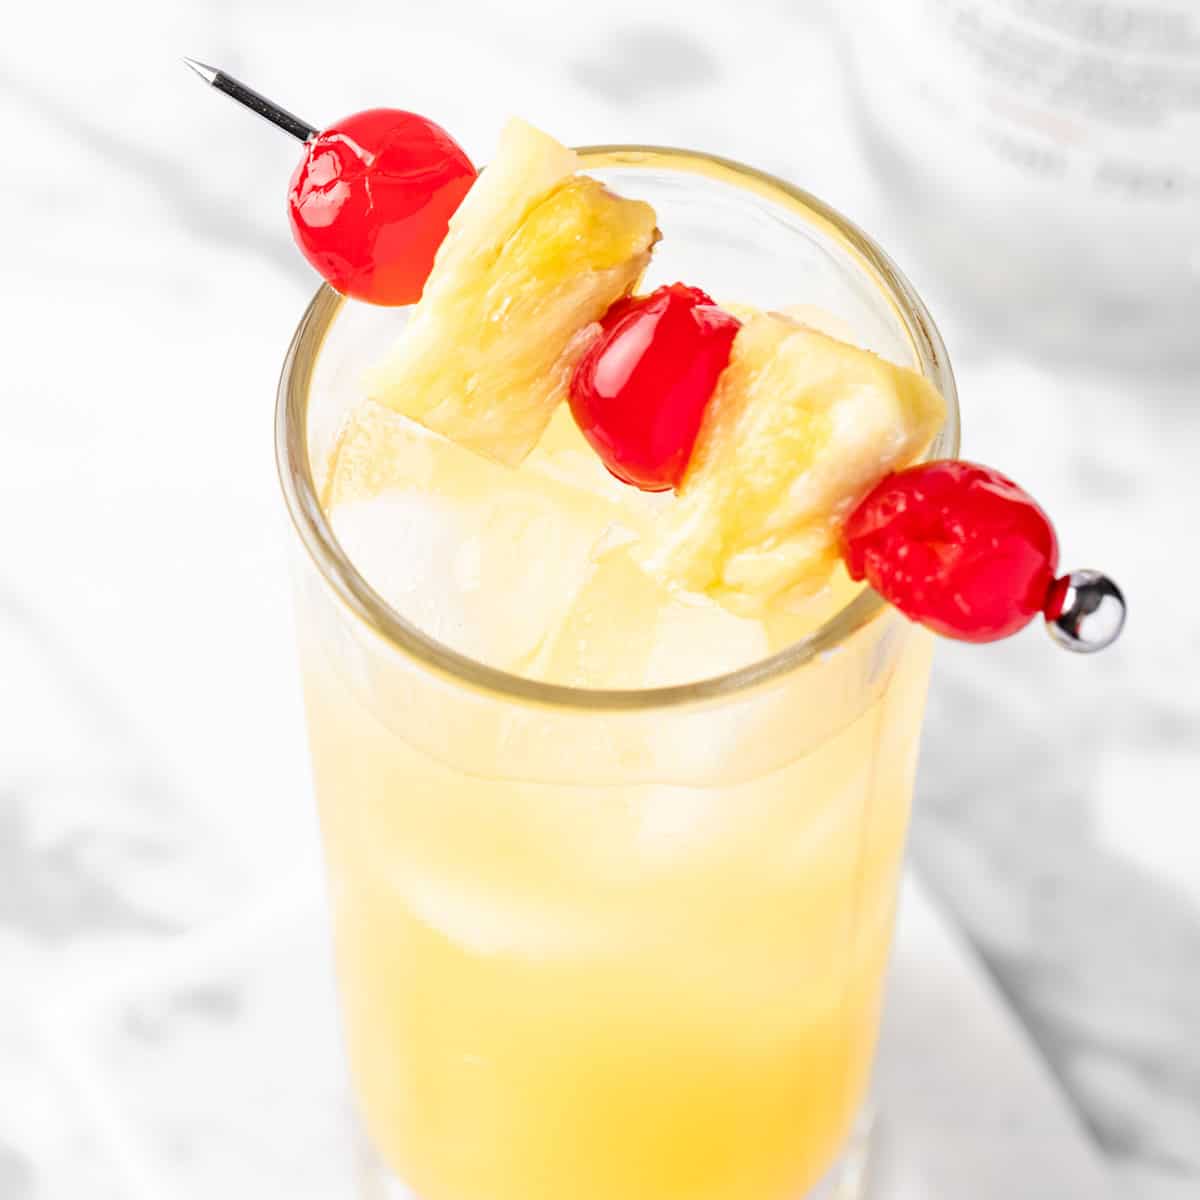 A Caribou Lou Cocktail garnished with cherries and pineapple slices.